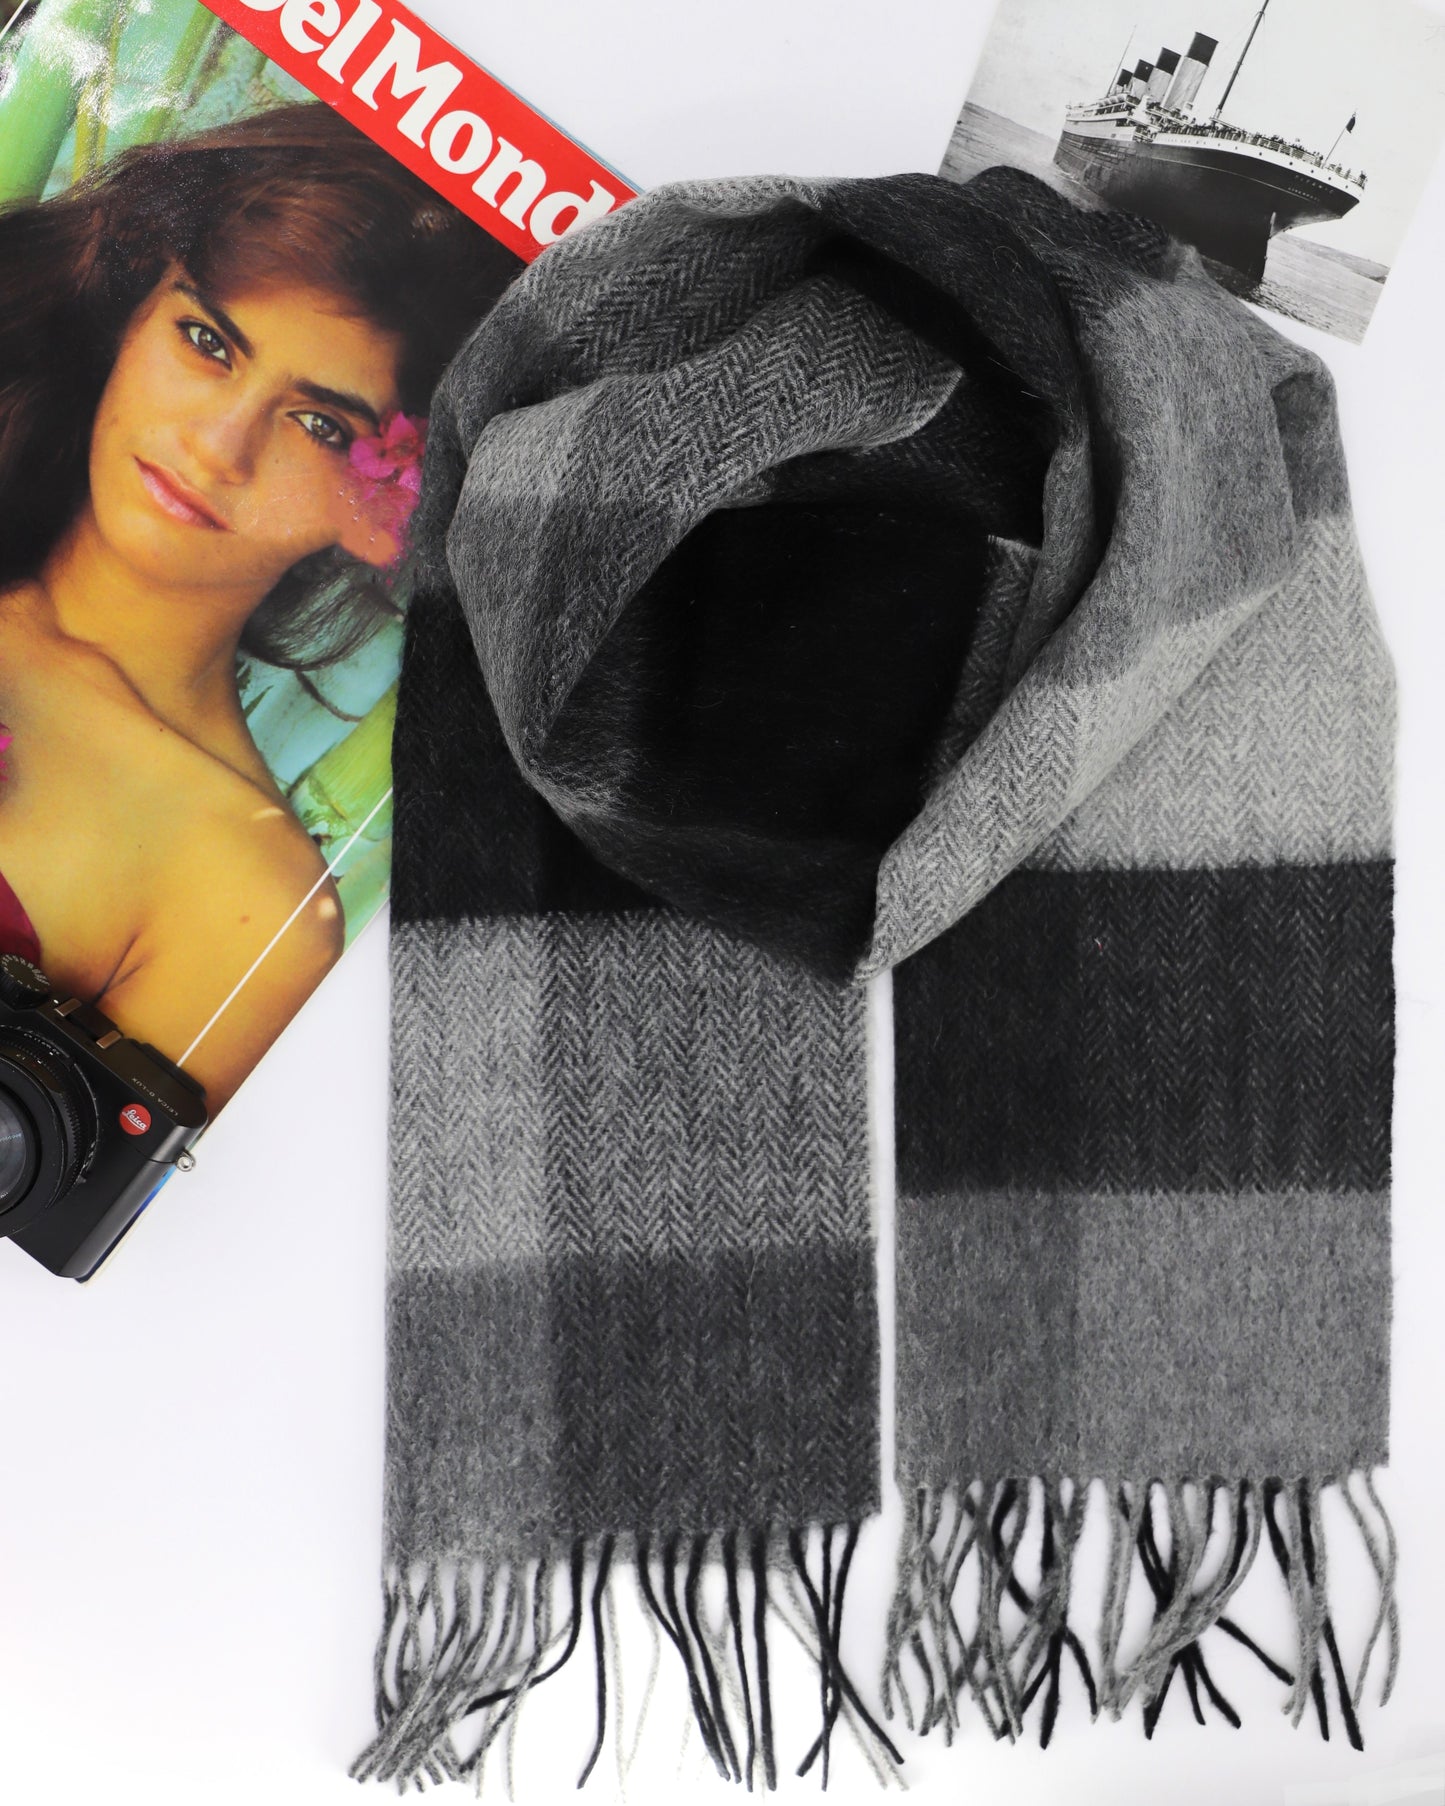 This Scarf is a finest 100% natural Australian wool scarf in a classic checked pattern from Villanelle. A luxurious accessory for women and for men and made from the softest natural wool for extreme comfort and warmth. It is made in a trendy combination of grey, black and creamy color. This product is sourced in Australia and manufactured in Poland.